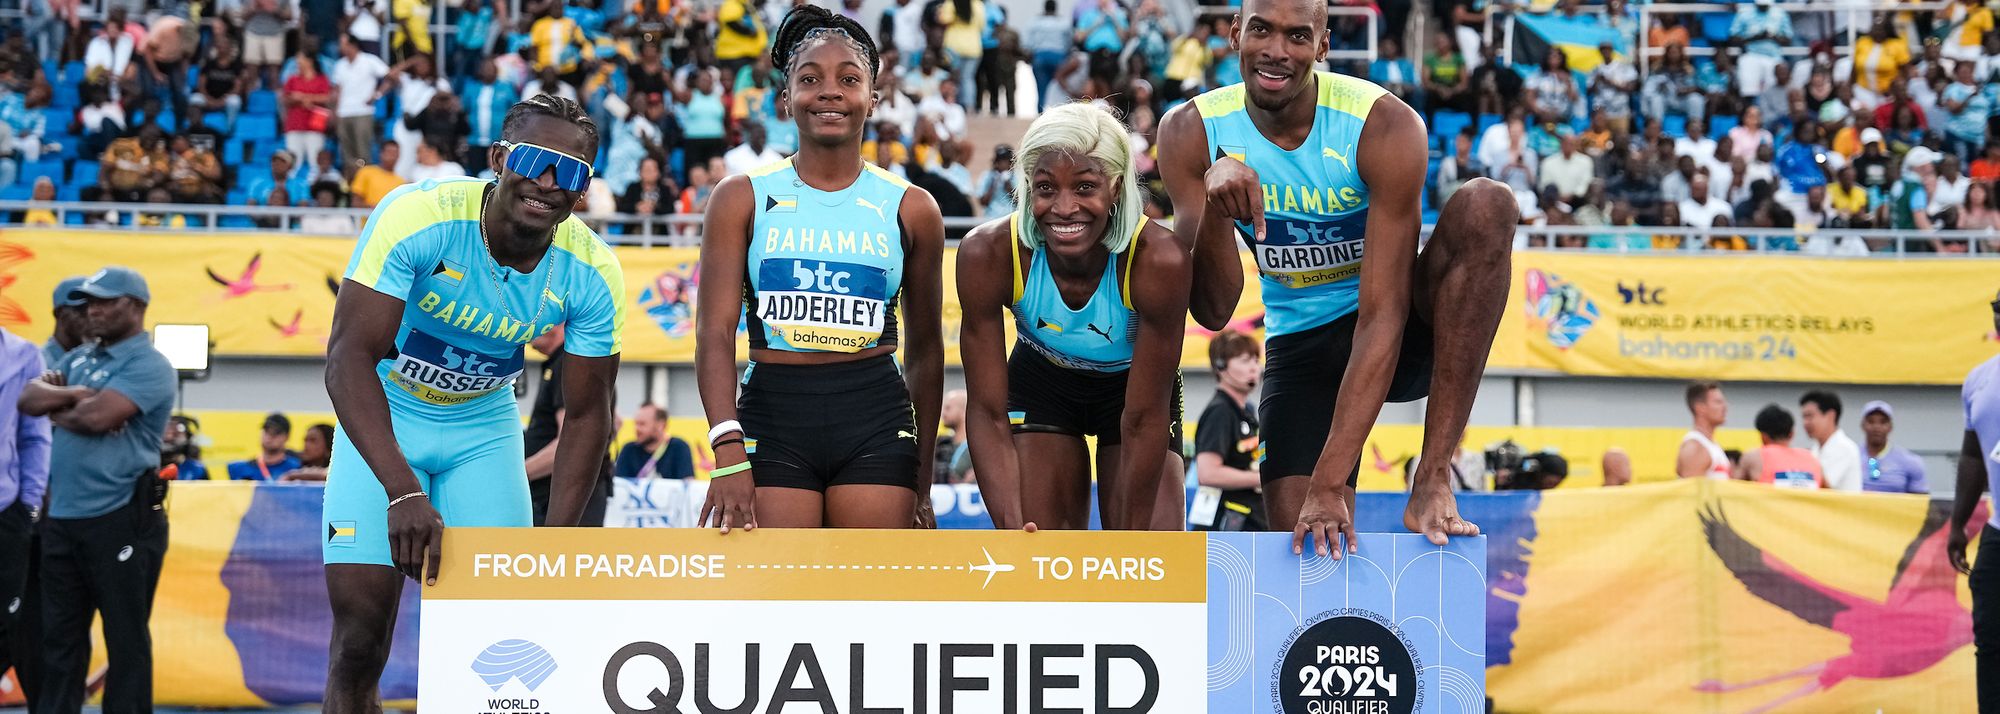 A total of 70 teams have qualified for relay events at the Paris 2024 Olympic Games following two days of thrilling action at the World Athletics Relays Bahamas 24